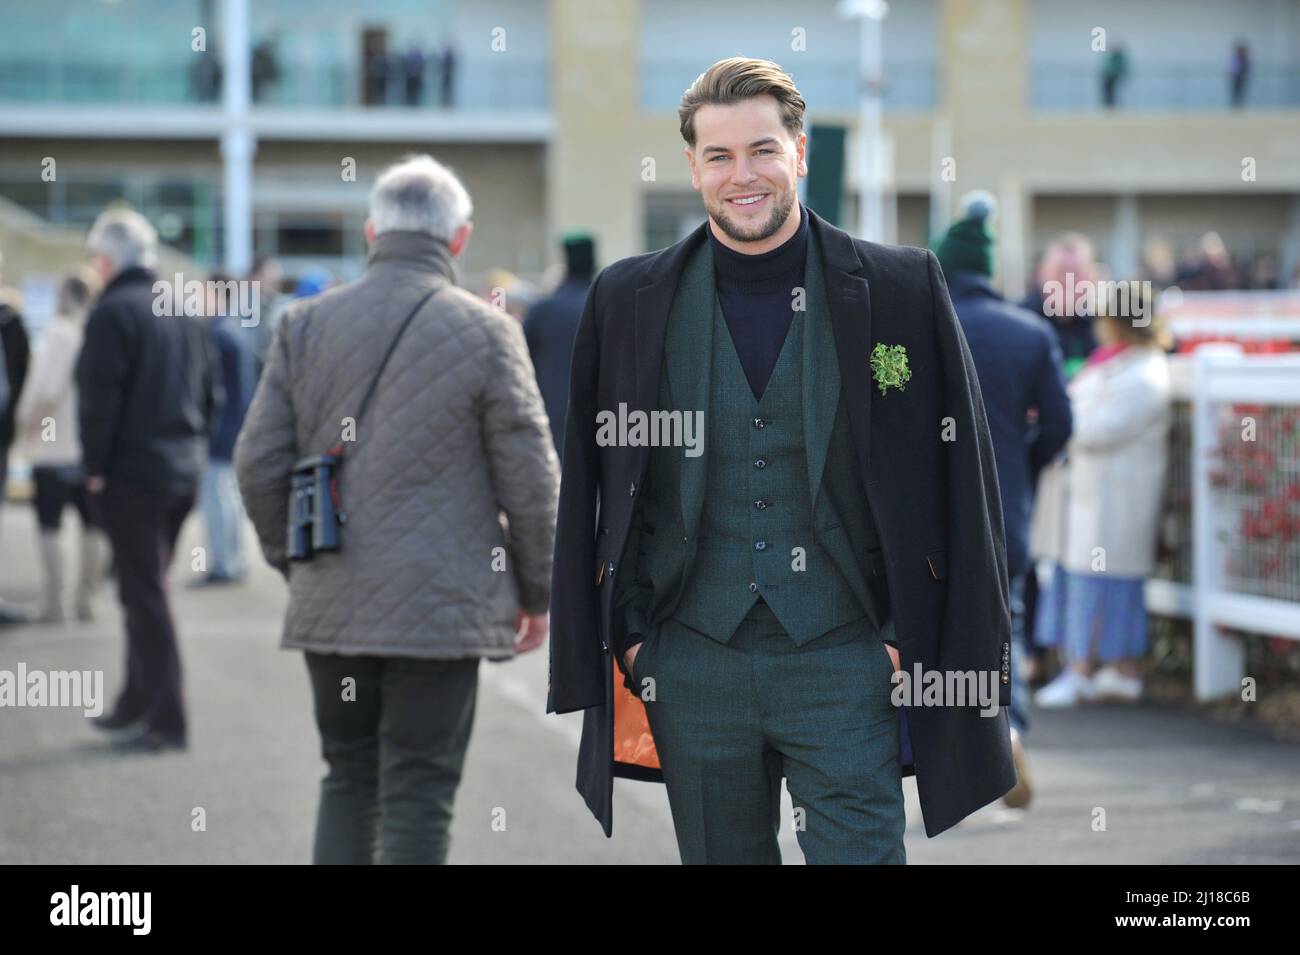 Love Island star turned ITV racing pundit Chris Hughes   Day Three at Cheltenham Racecourse Gold Cup Festival    St Patrick's Day    Pictures by Mikal Stock Photo